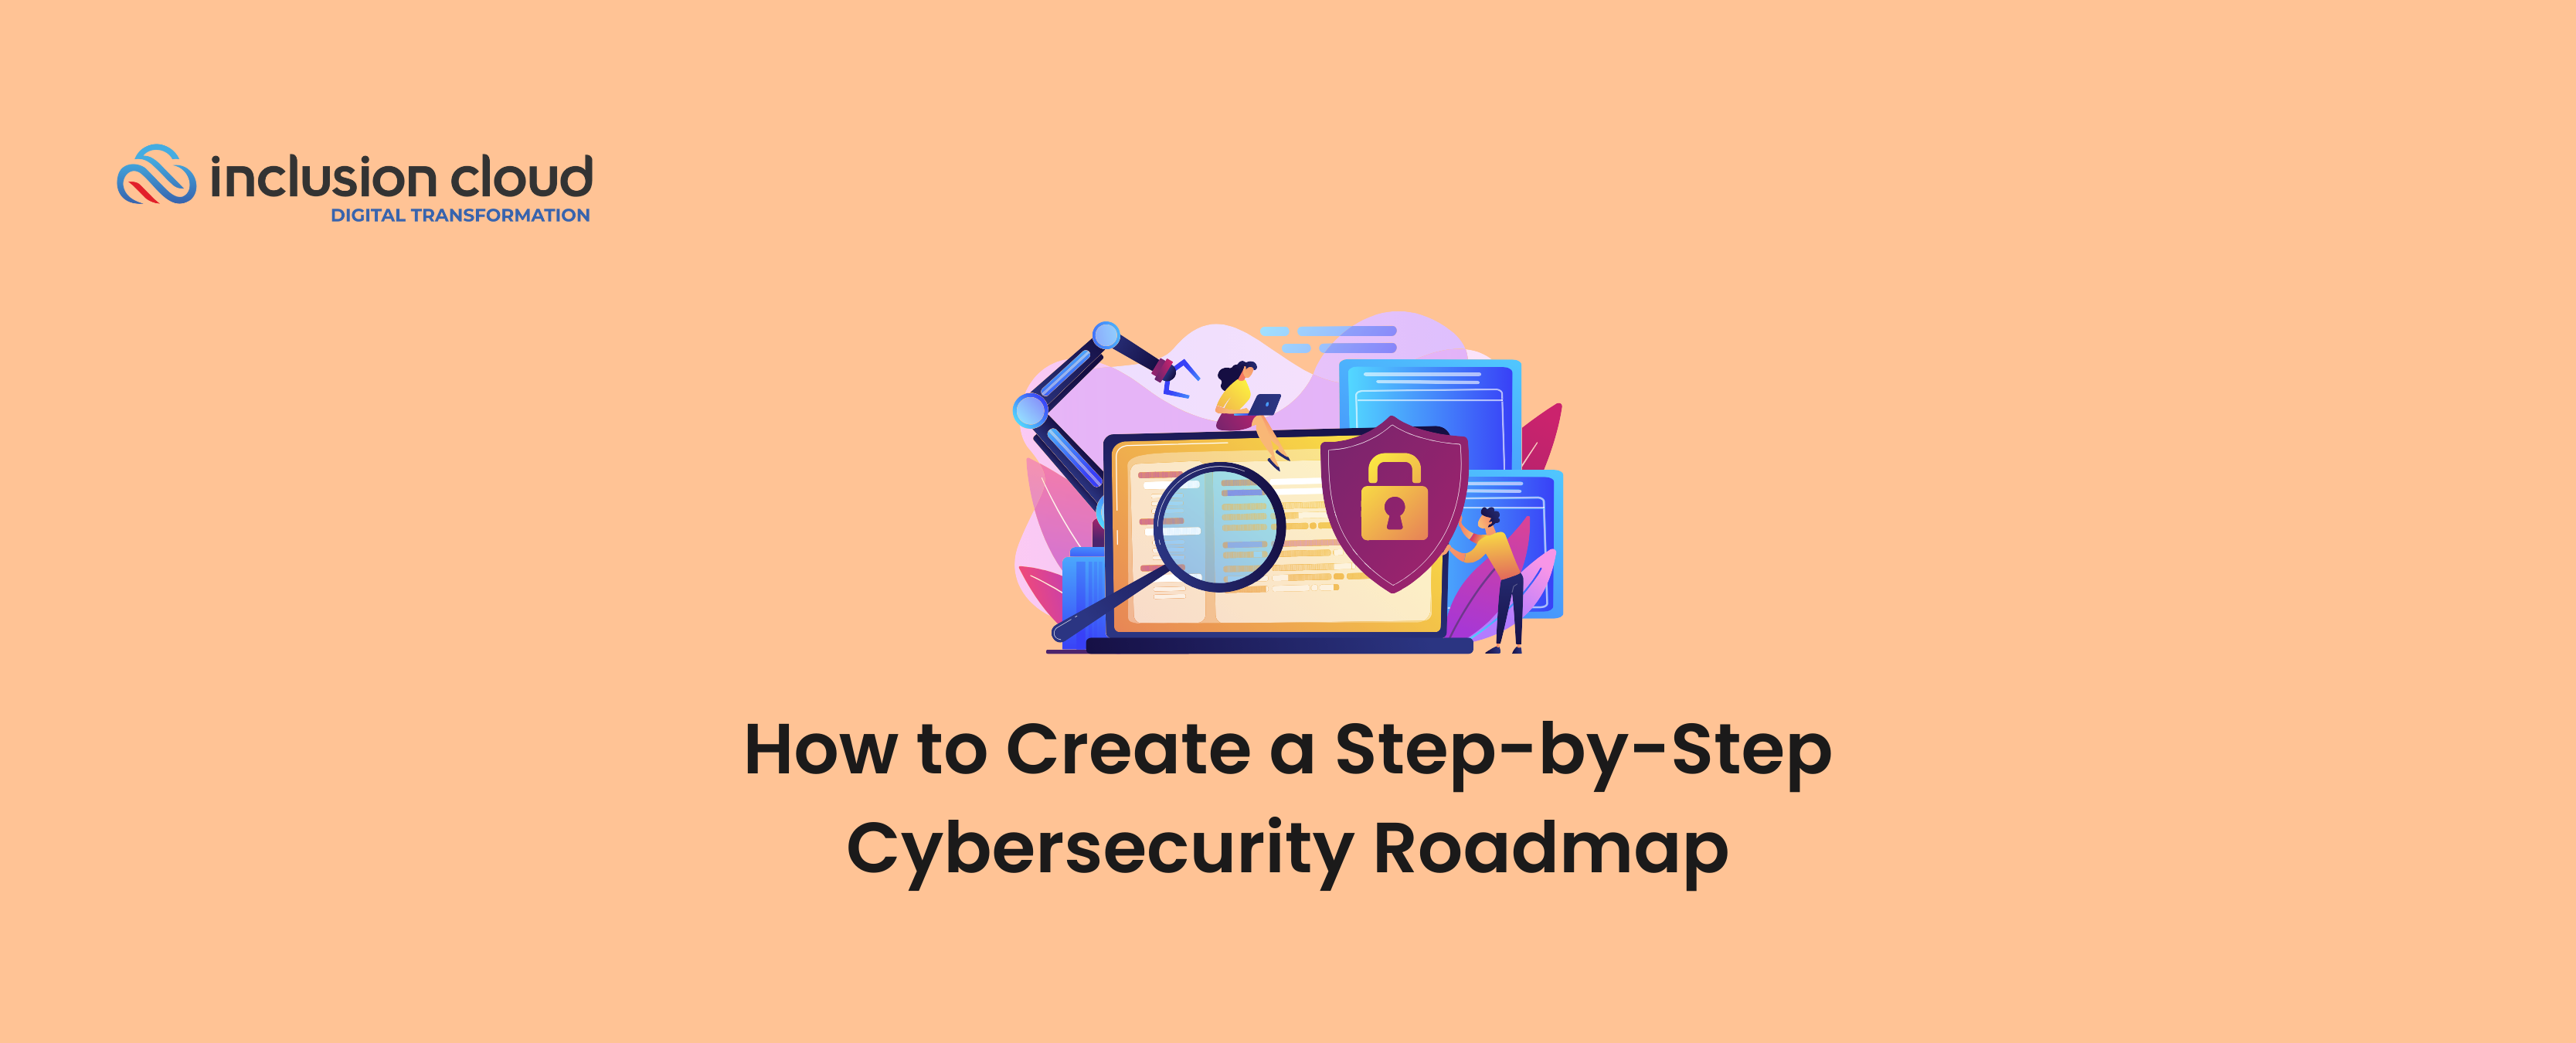 How to Create a Step-by-Step Cybersecurity Roadmap